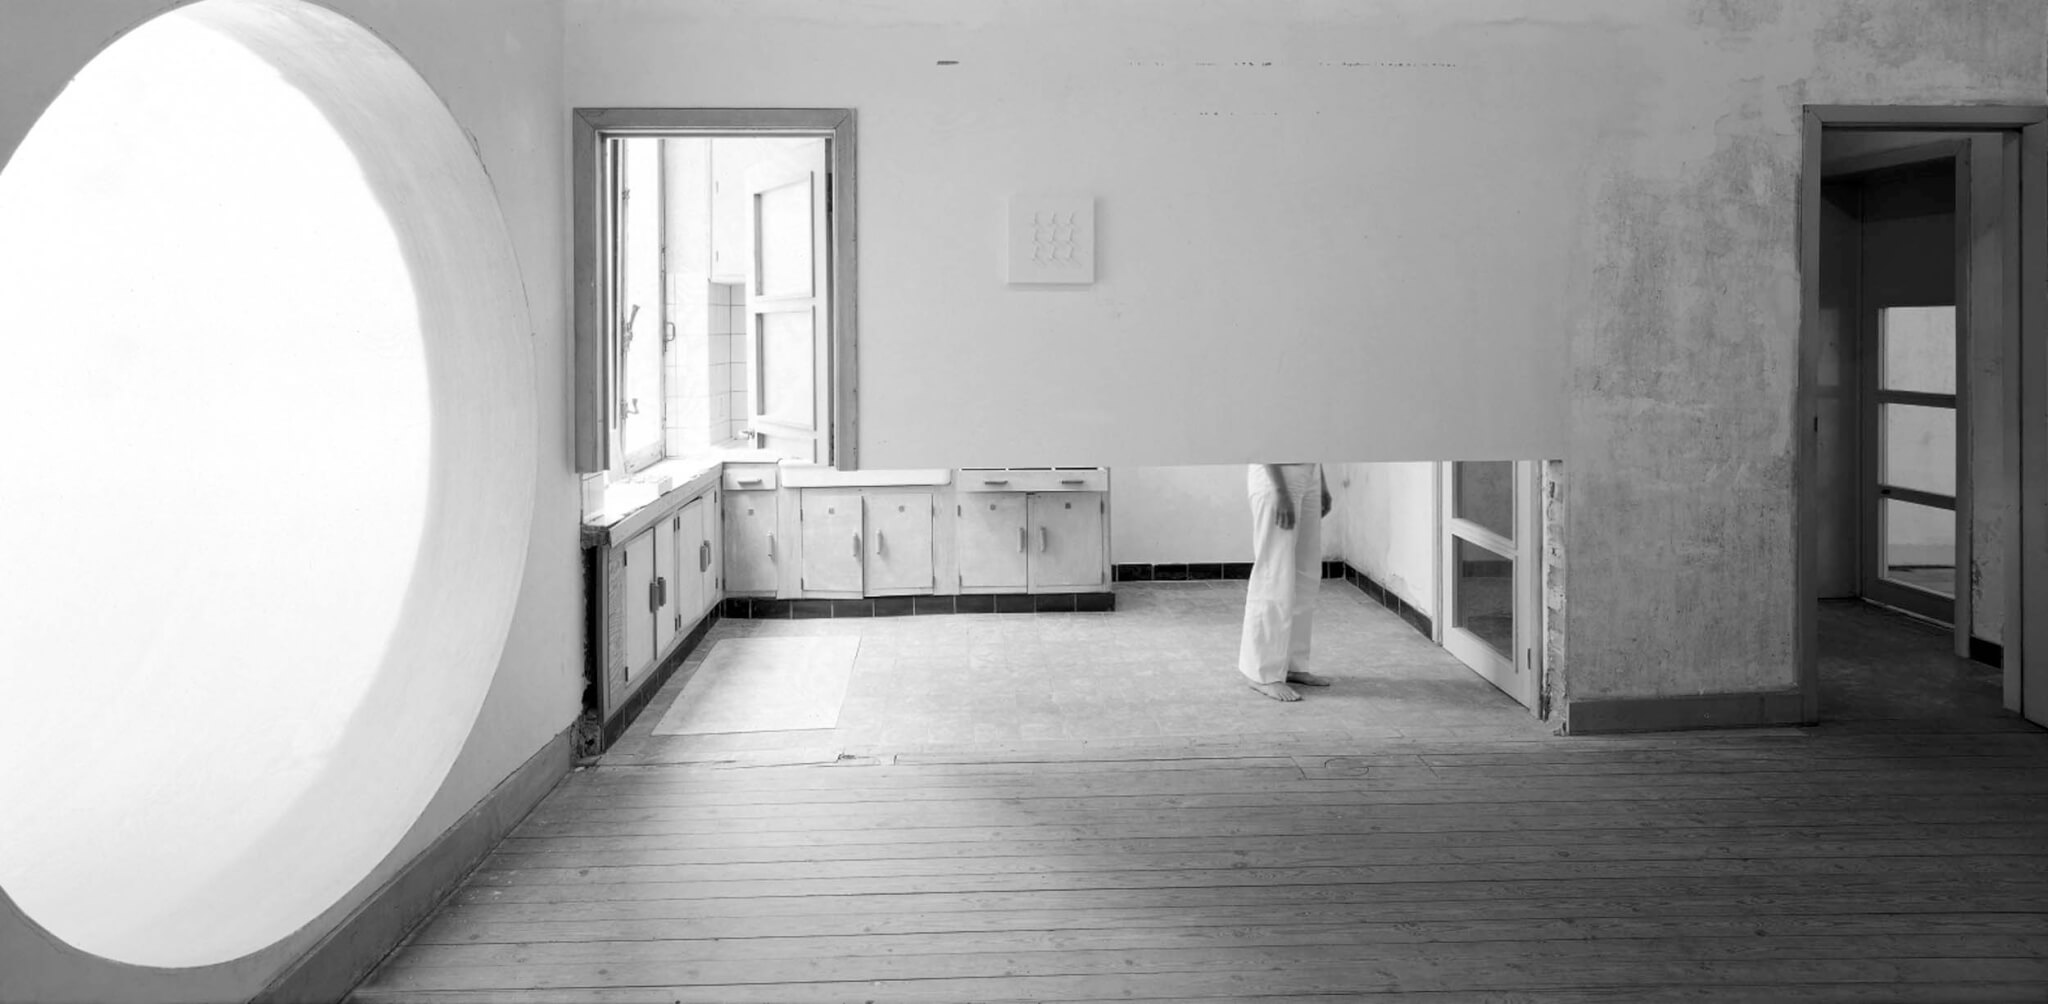 black and white photo of old kitchen and half walls